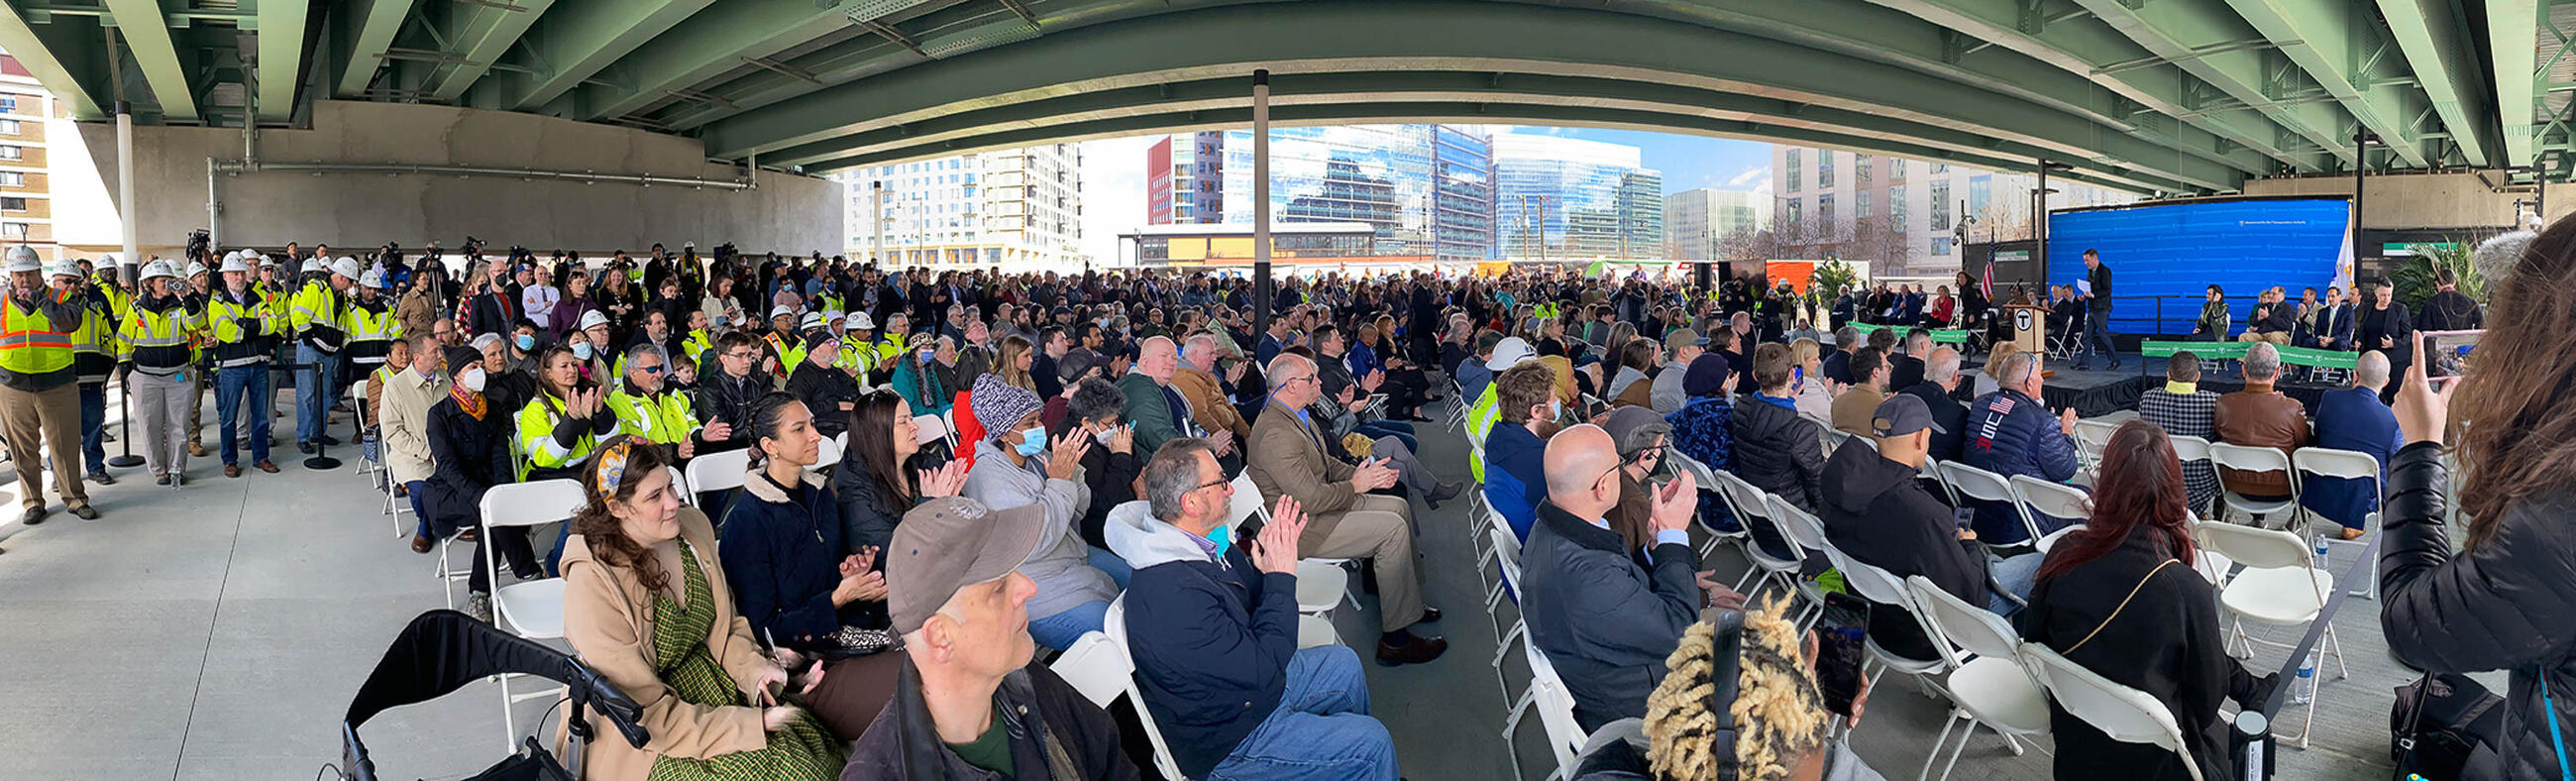 Federal, state, and local elected leaders joined community advocates, stakeholder groups, and MBTA and GLX staff for the opening event at the new Lechmere Station.